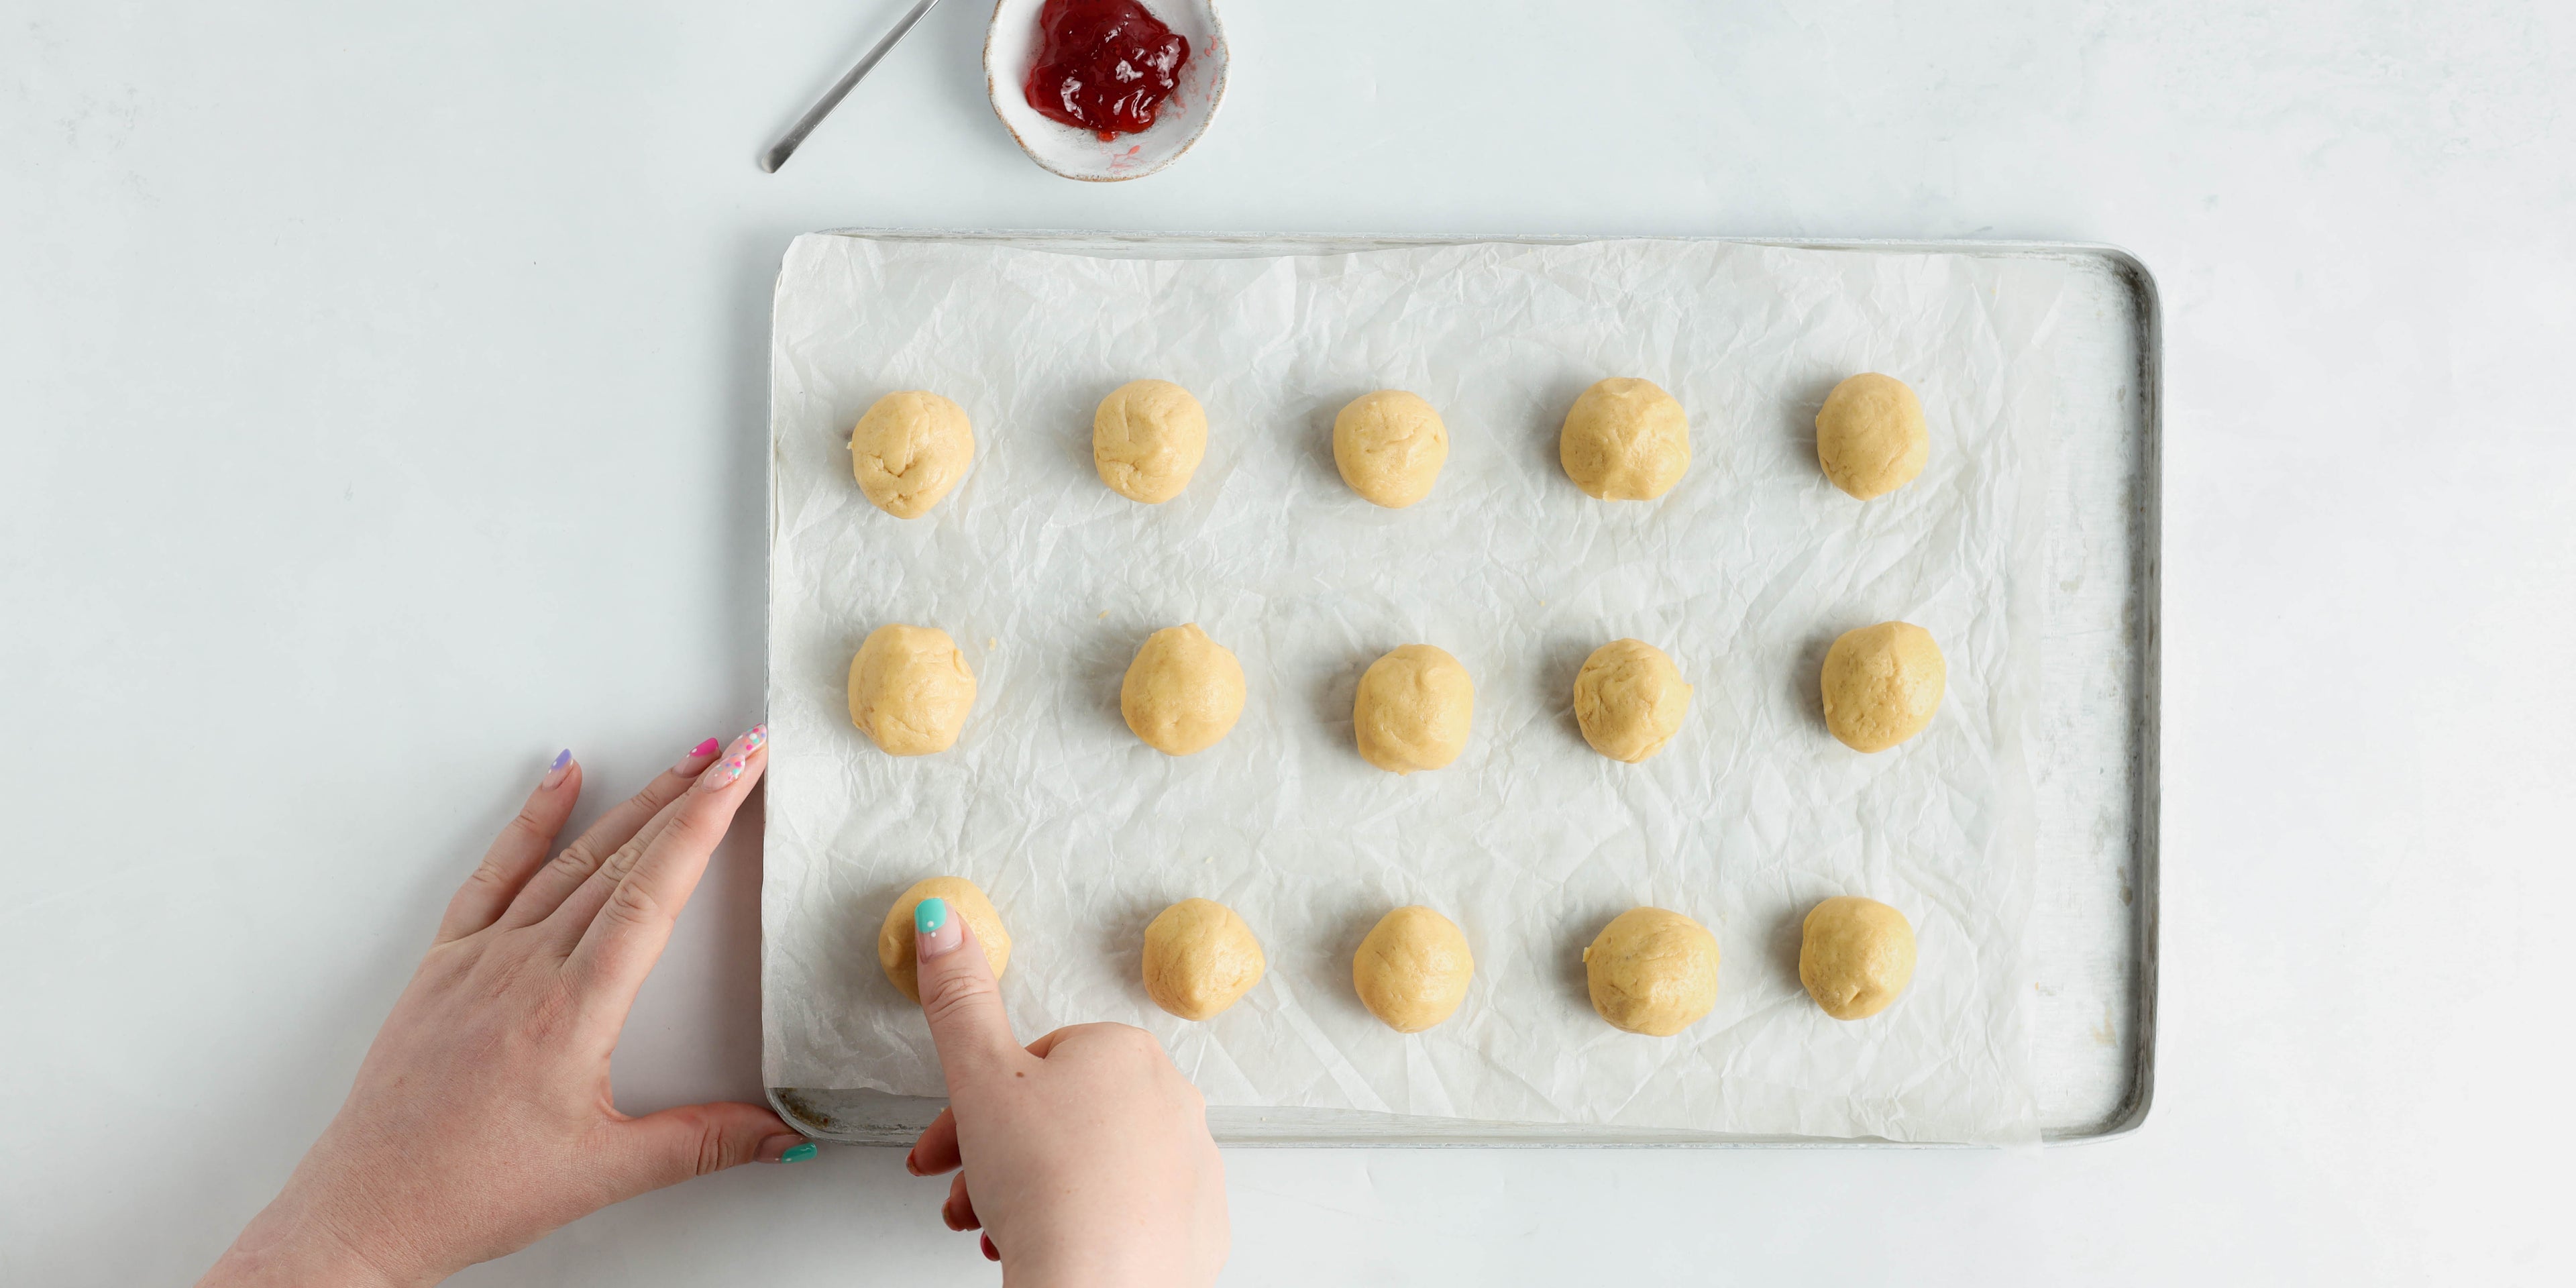 15 balls of cookie dough on a tray with a thumb pushing into one. A pot of jam at the top